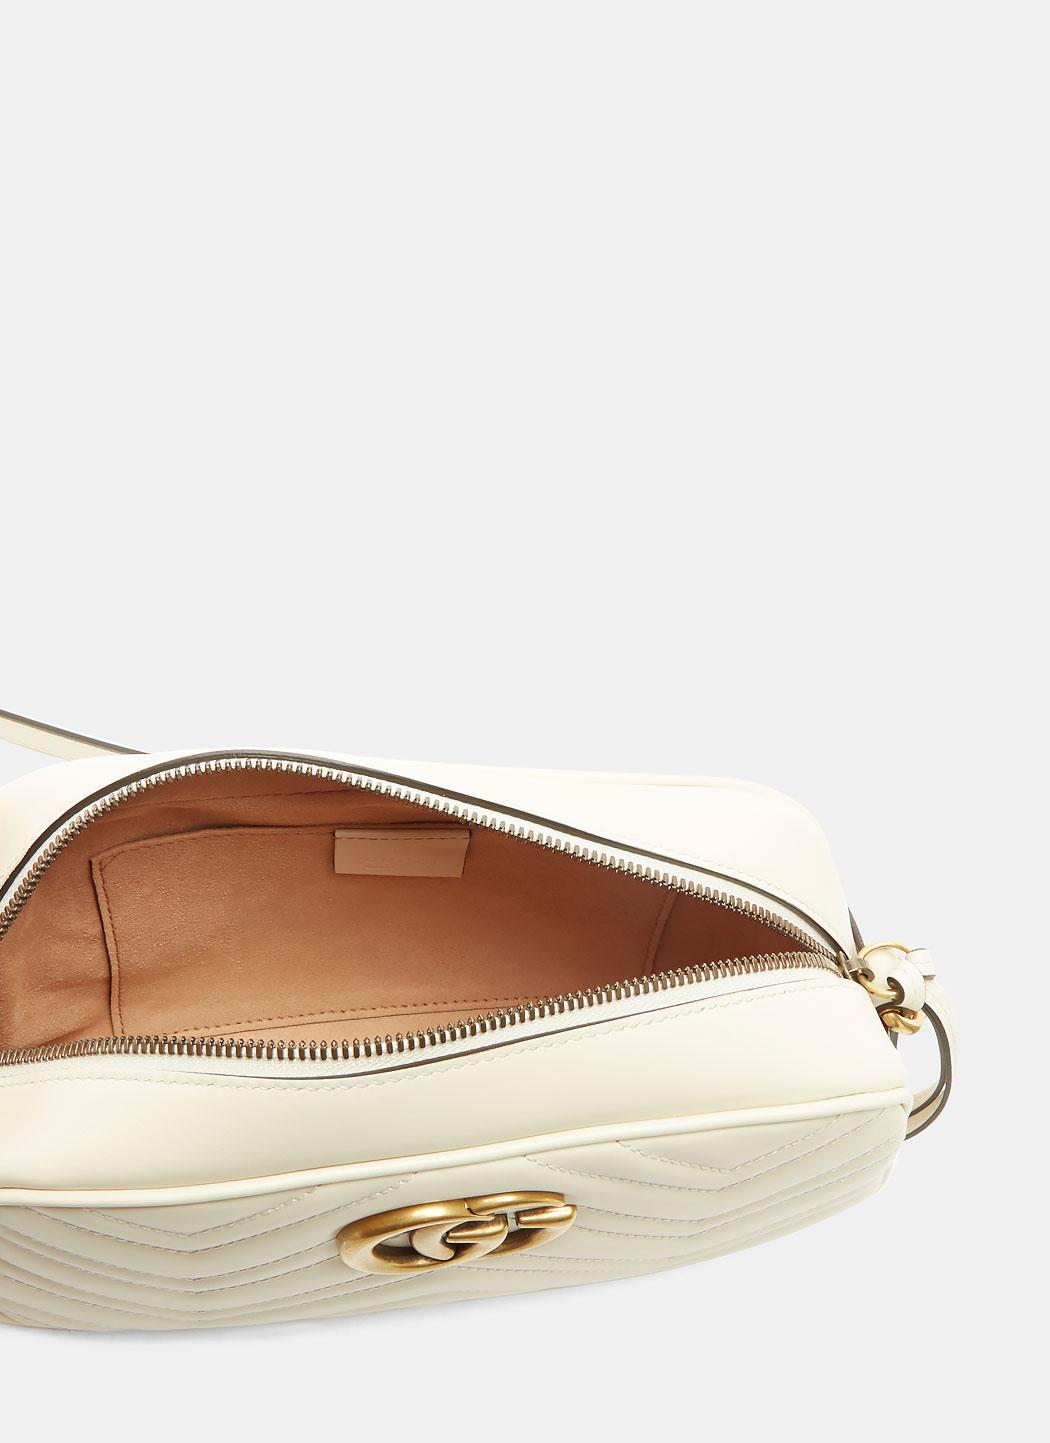 Lyst - Gucci Gg Marmont Matelassé Small Shoulder Bag In Ivory in White